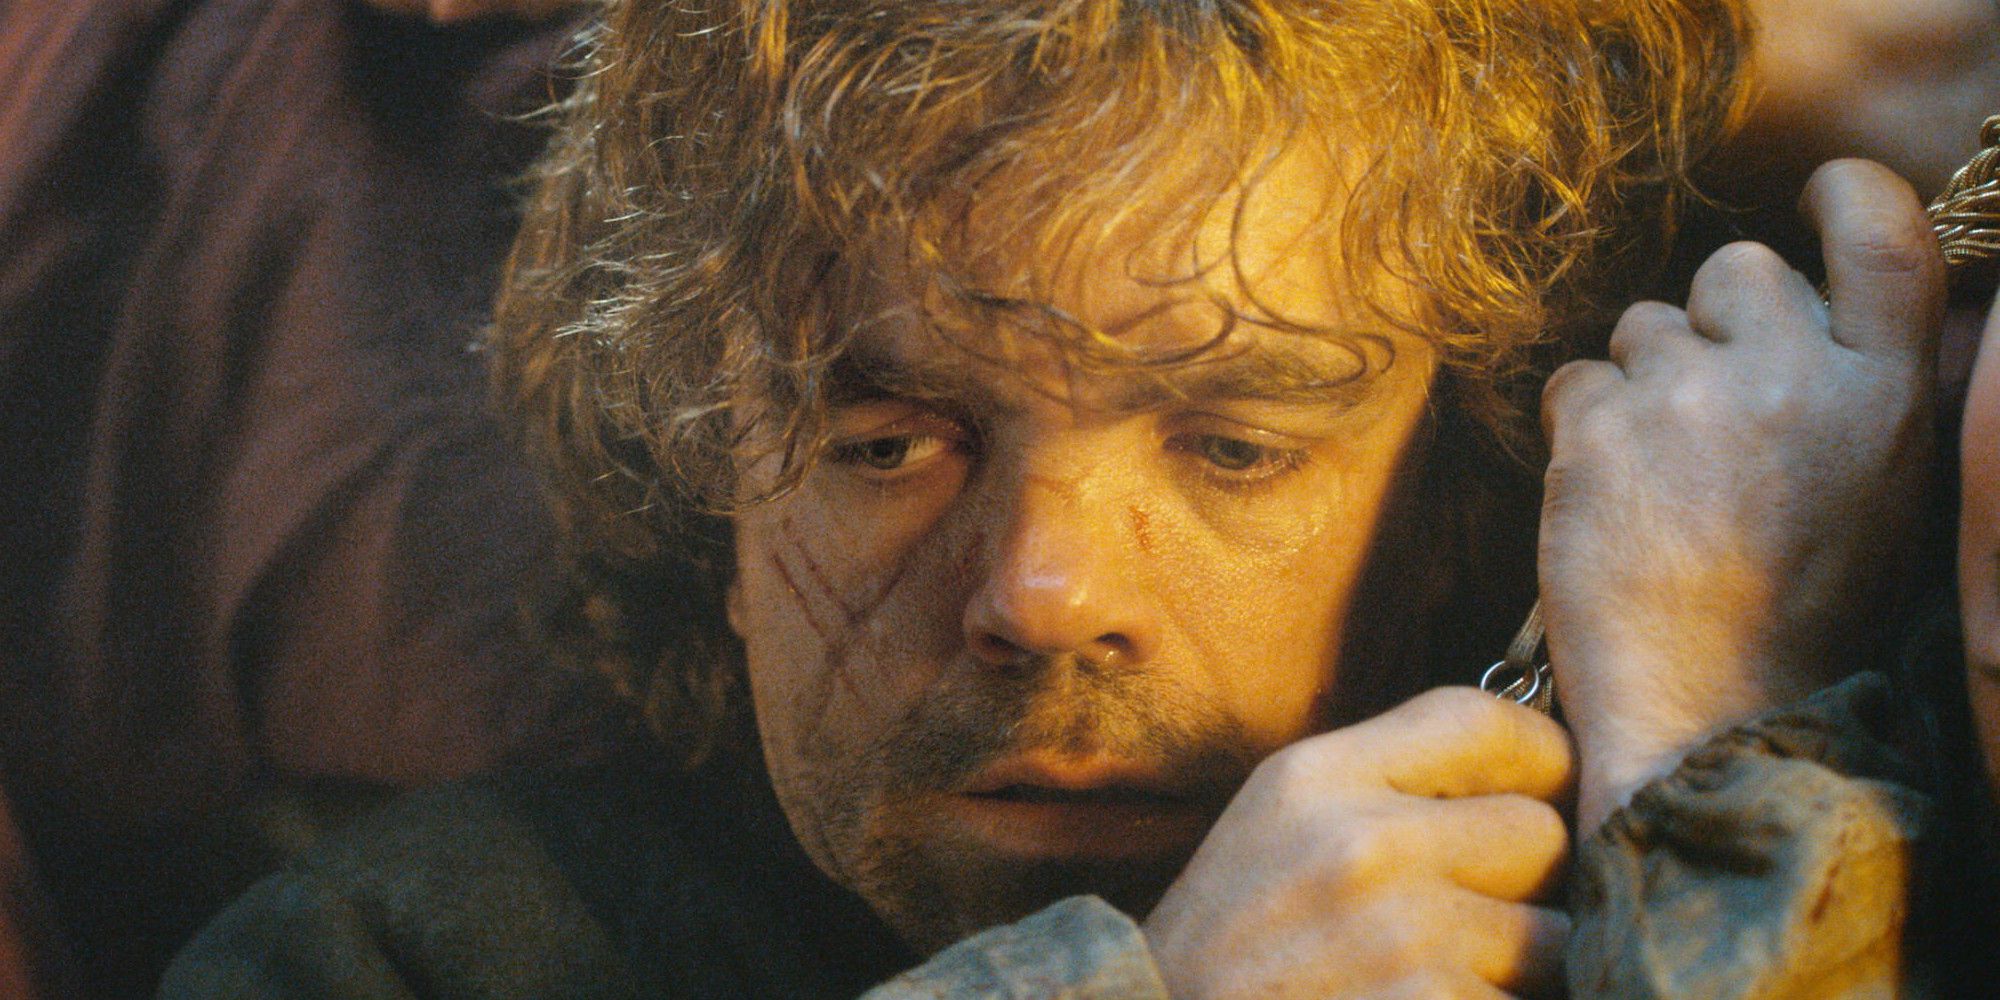 Tyrion Strangles Shae after finding her sleeping with Tywin in Game of Thrones